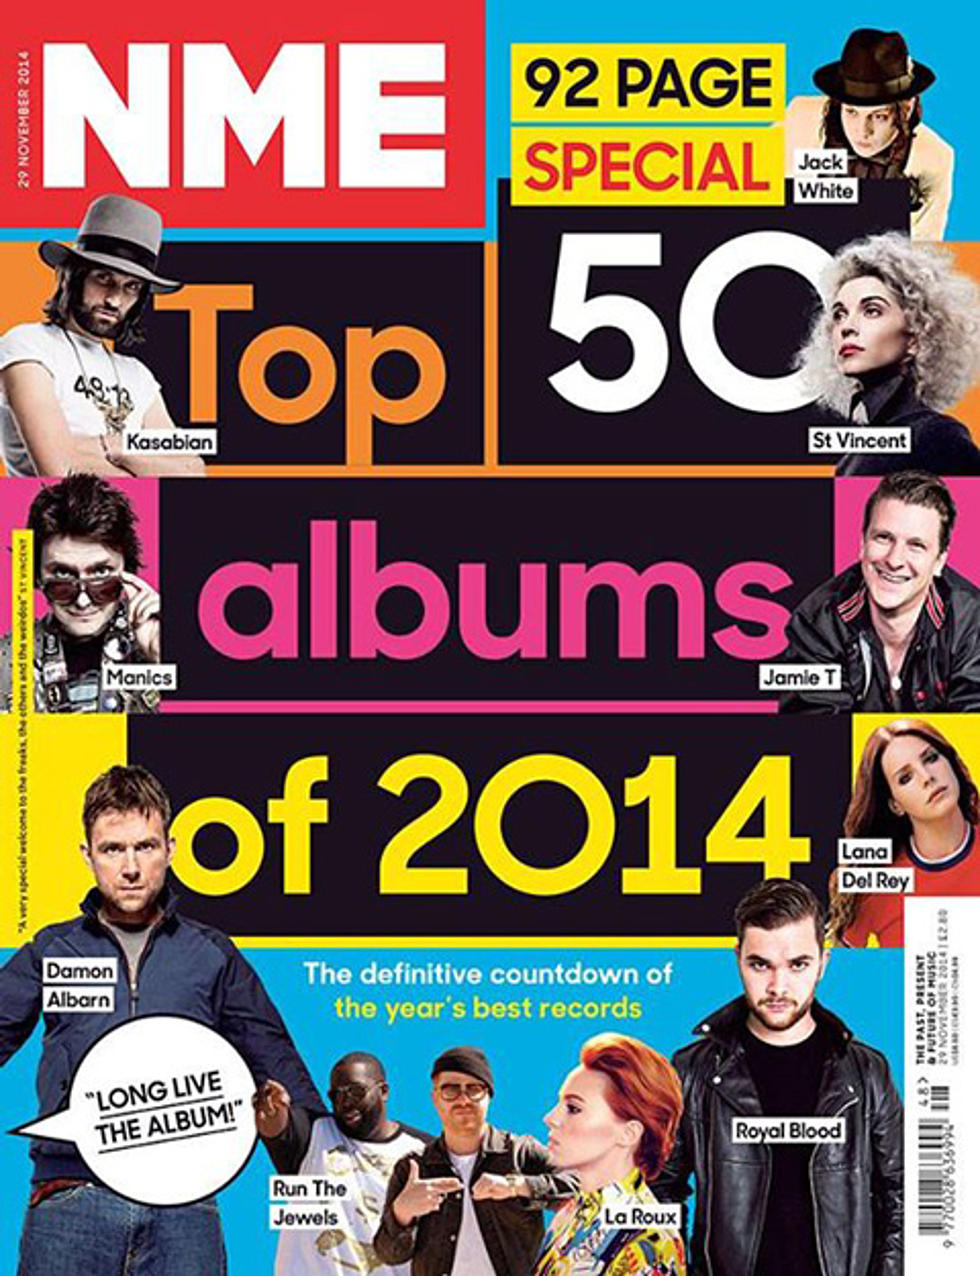 NME's Top 50 albums & tracks of 2014